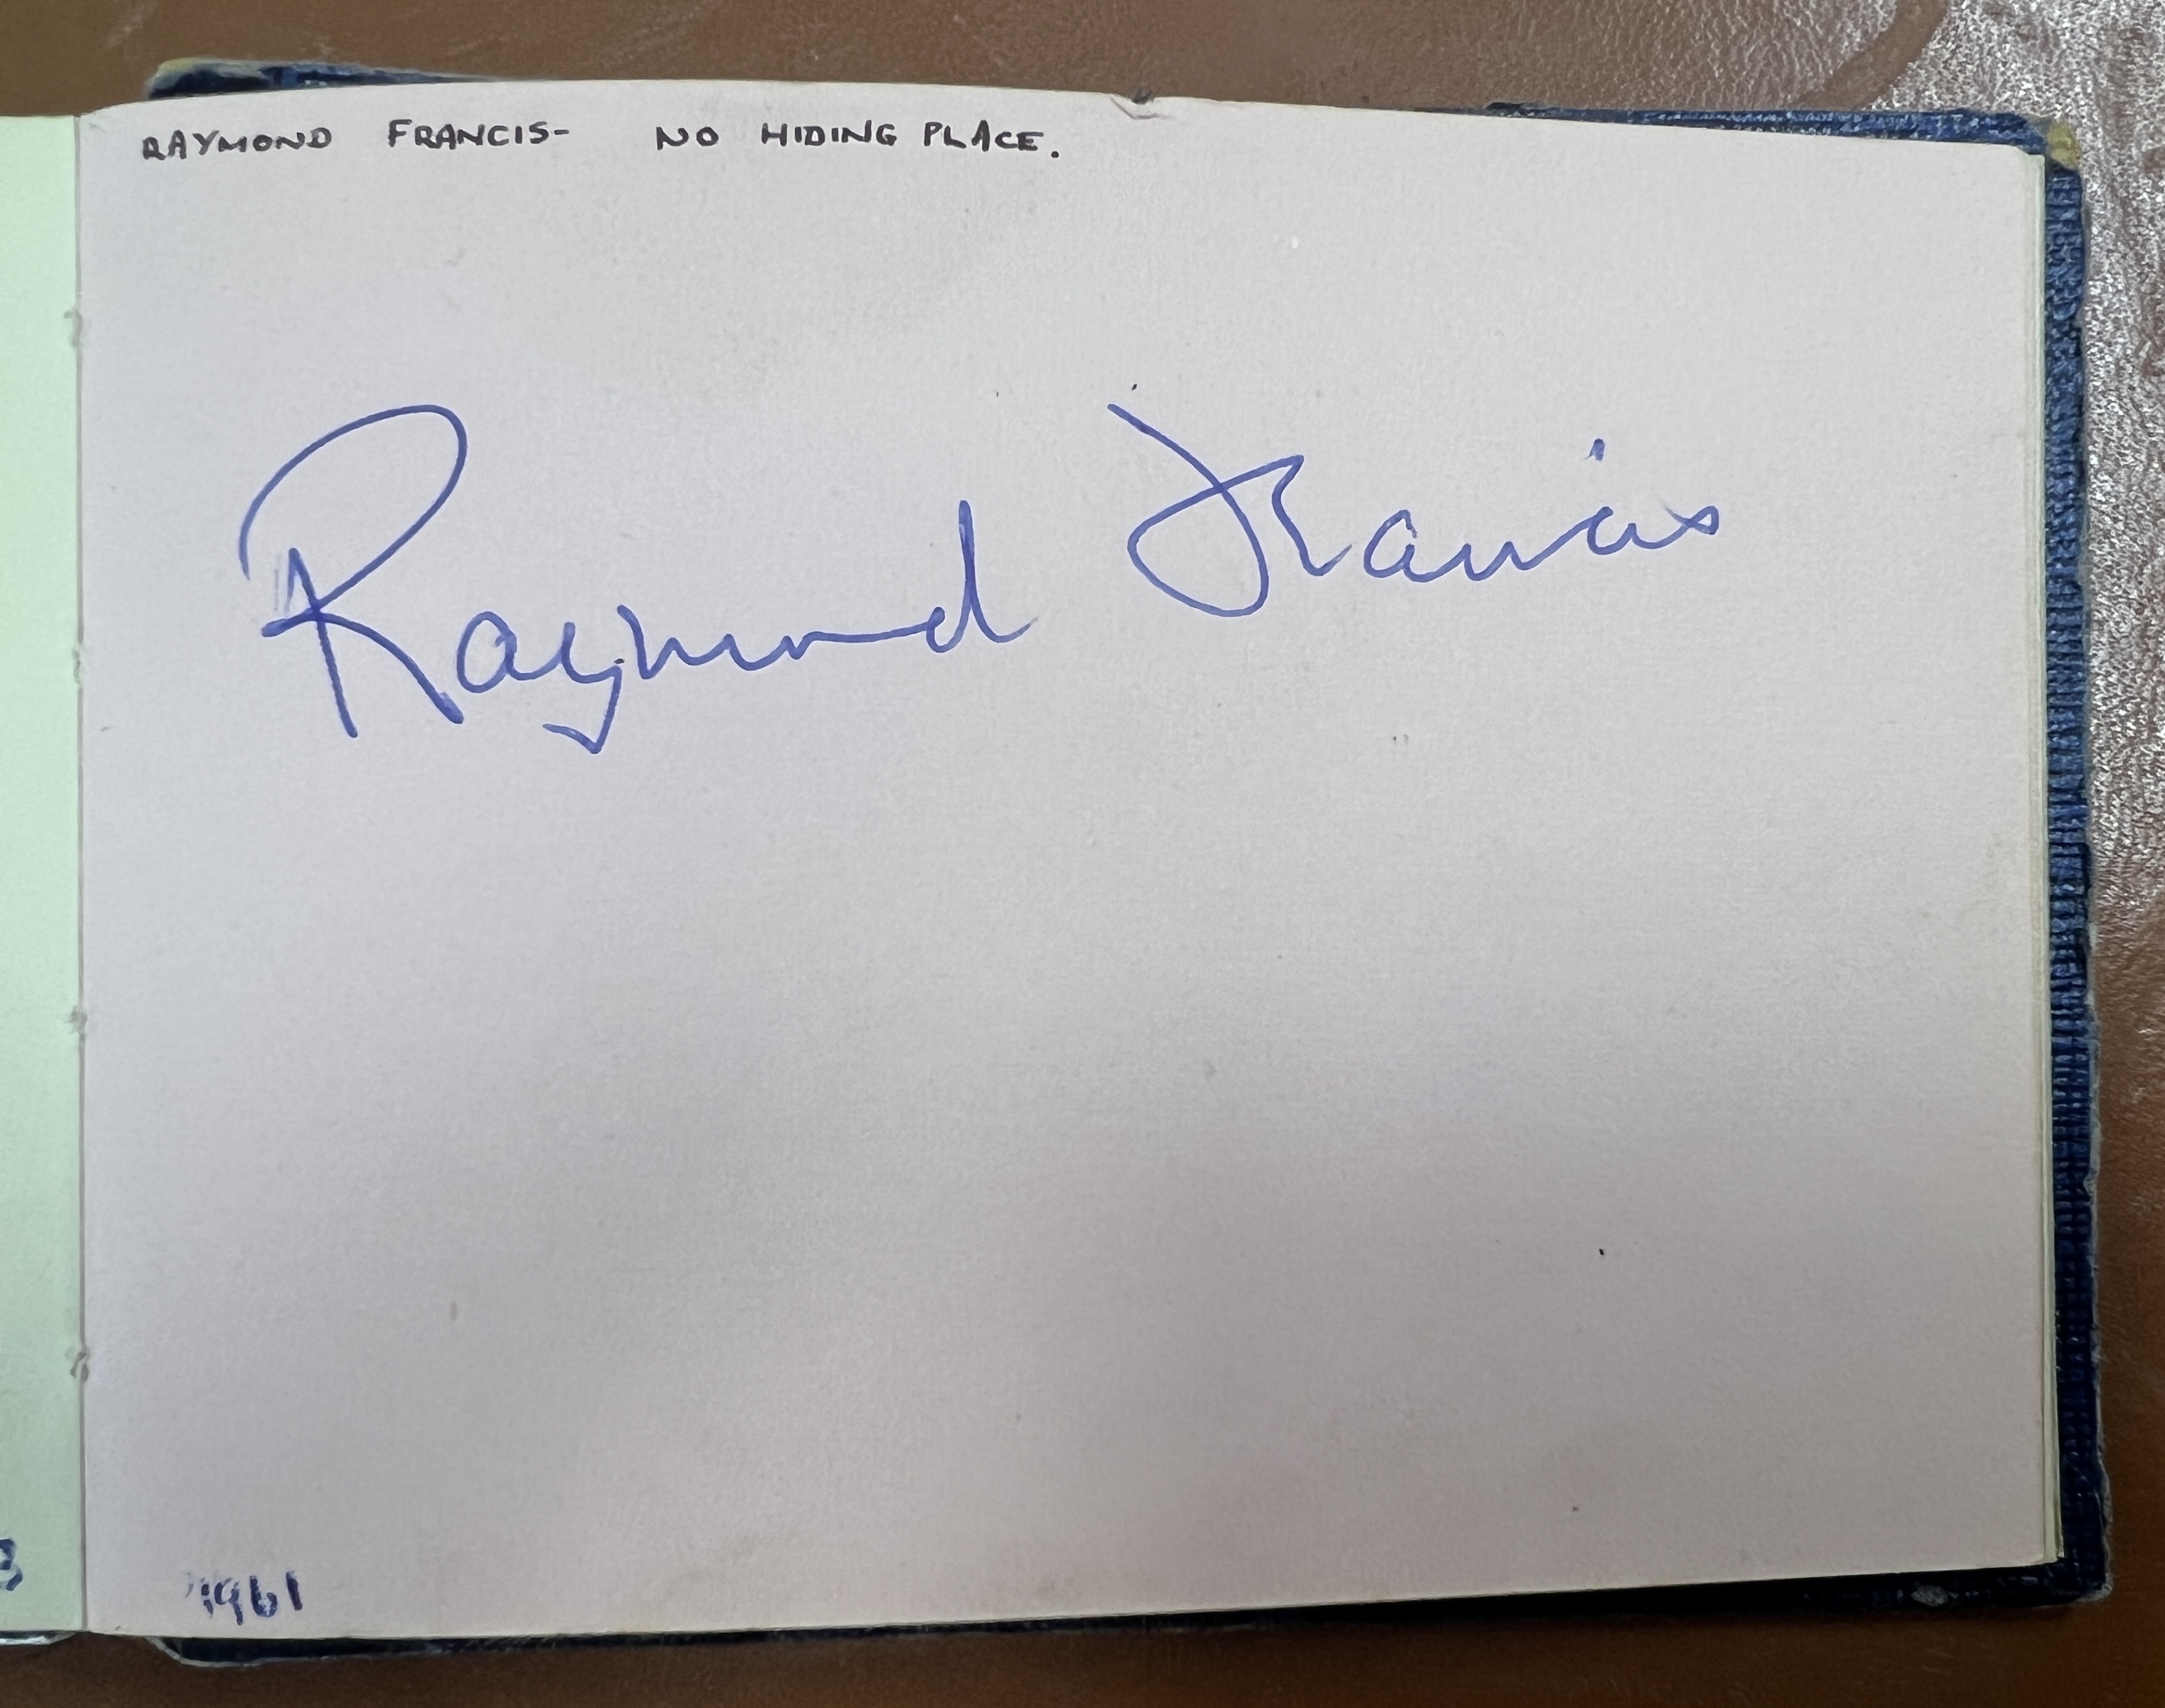 A 1960's autograph album containing autographs of various celebrities including Cliff Richard, - Image 8 of 37